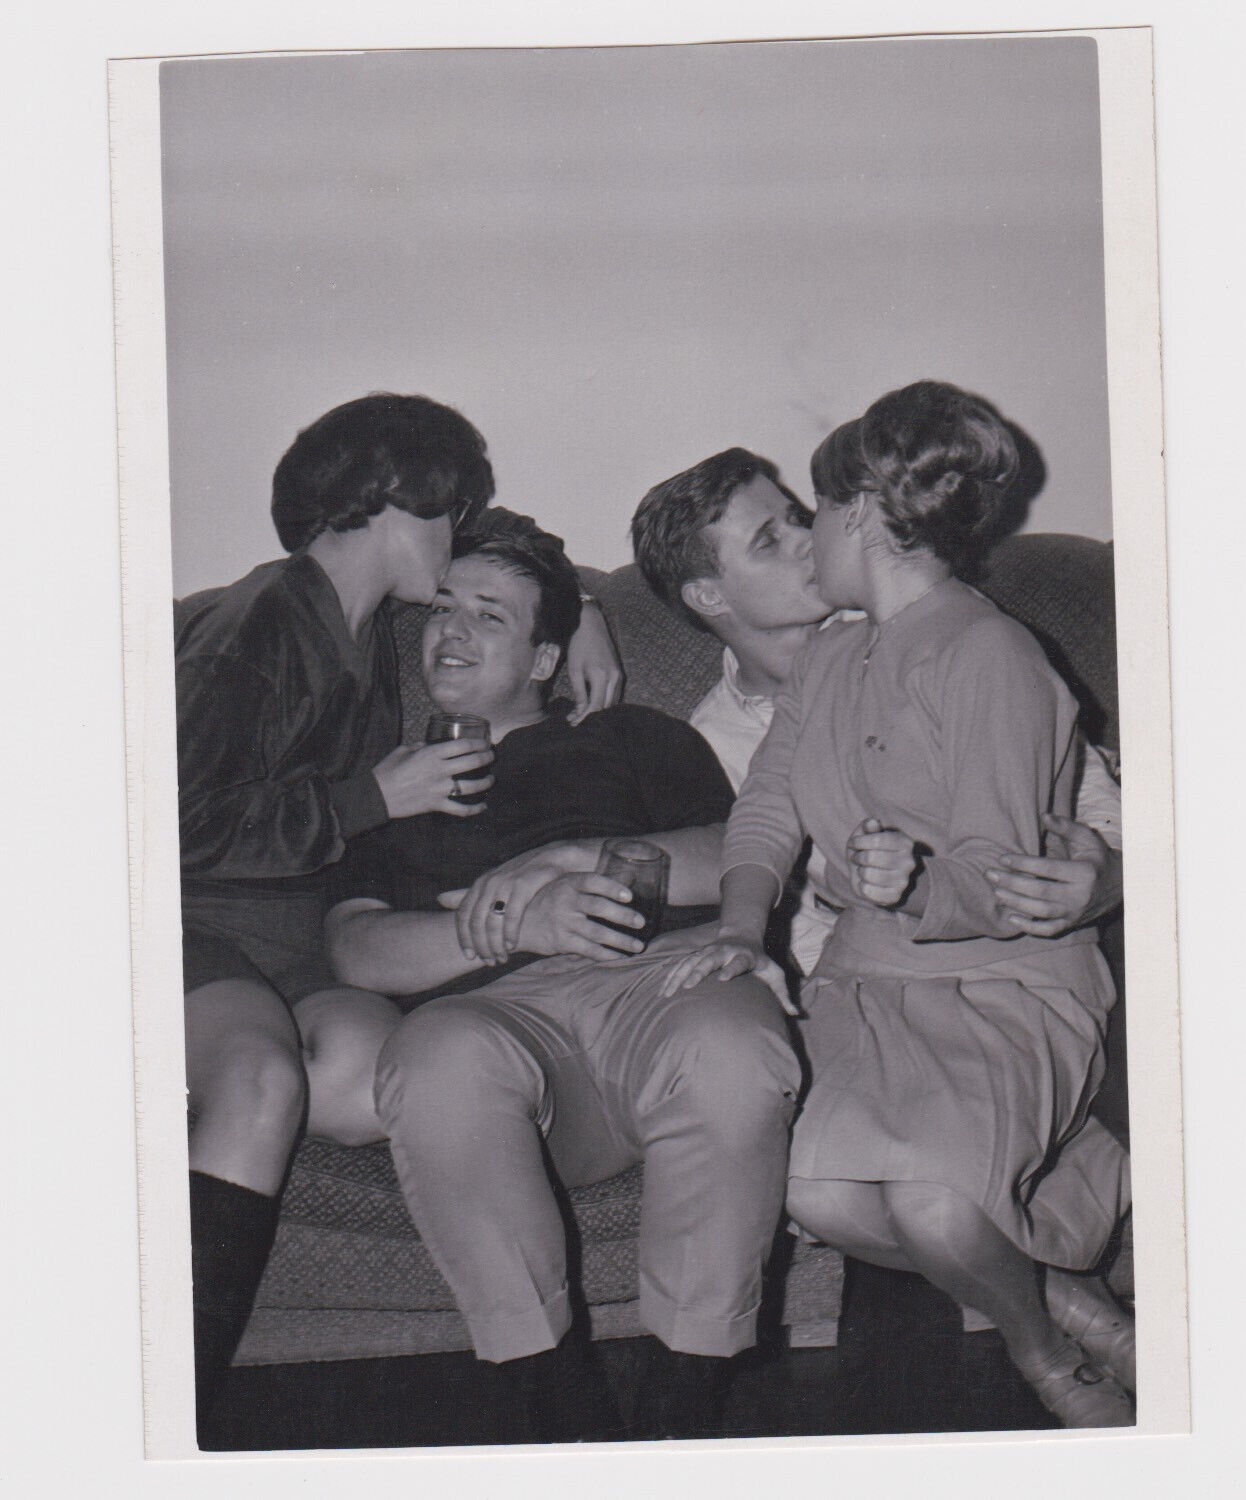 vtg snapshot  photo of frisky couples on couch kissing - swingers ?